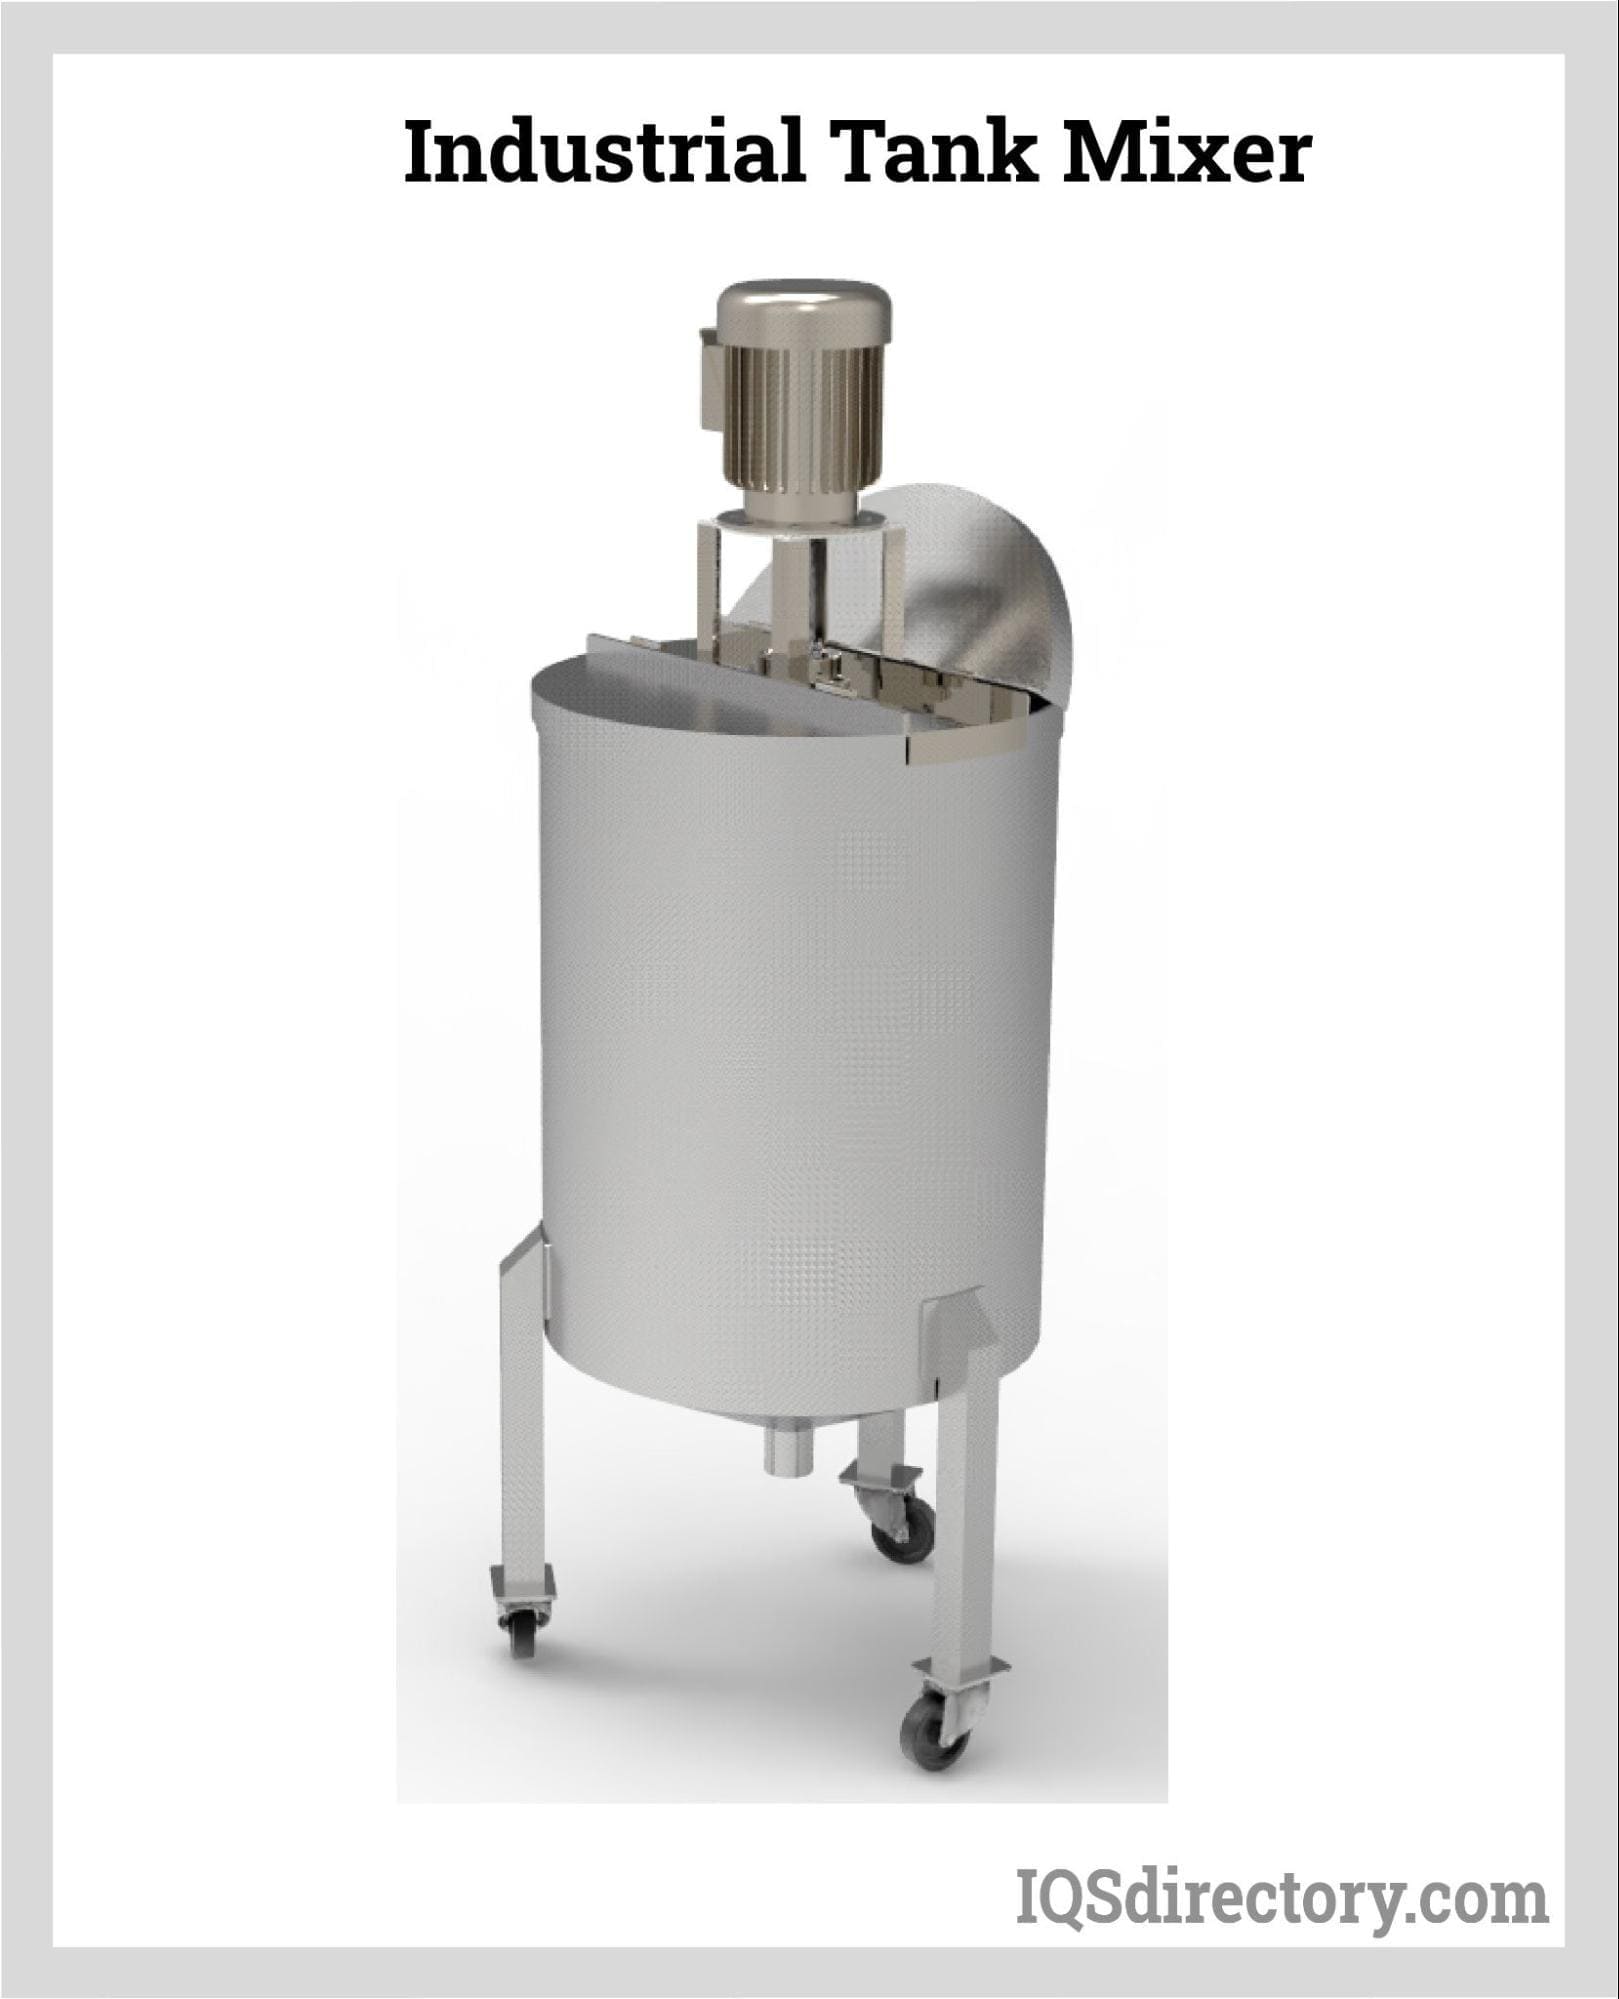 Tank Mixers: Components, Types, Regulations, and Considerations